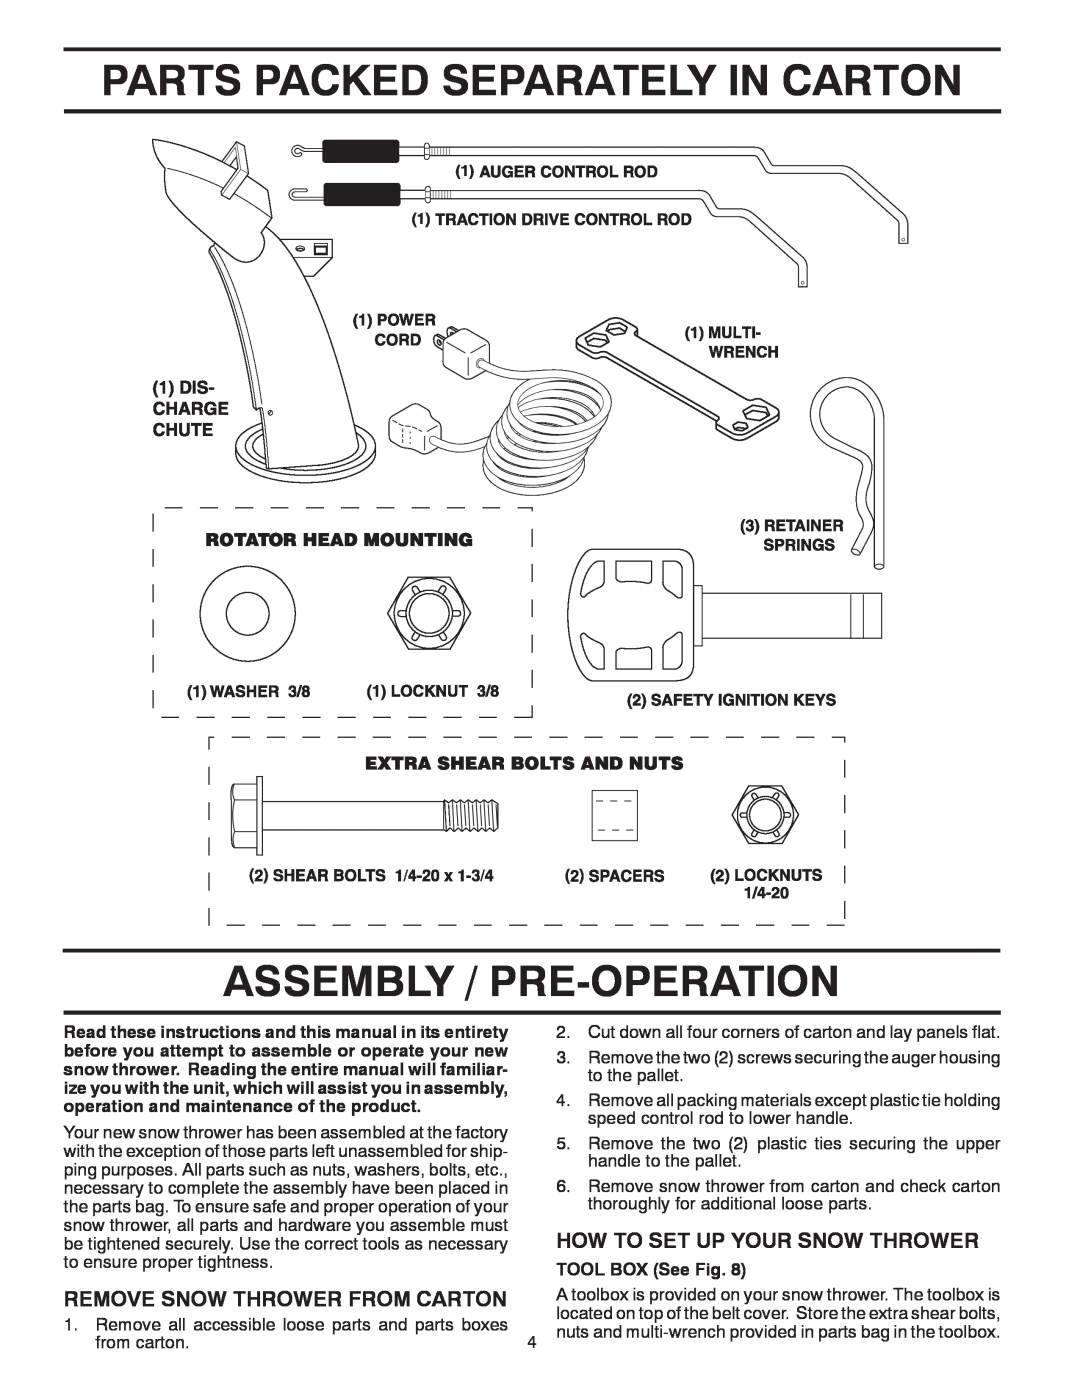 Poulan 418962 owner manual Parts Packed Separately In Carton Assembly / Pre-Operation, How To Set Up Your Snow Thrower 